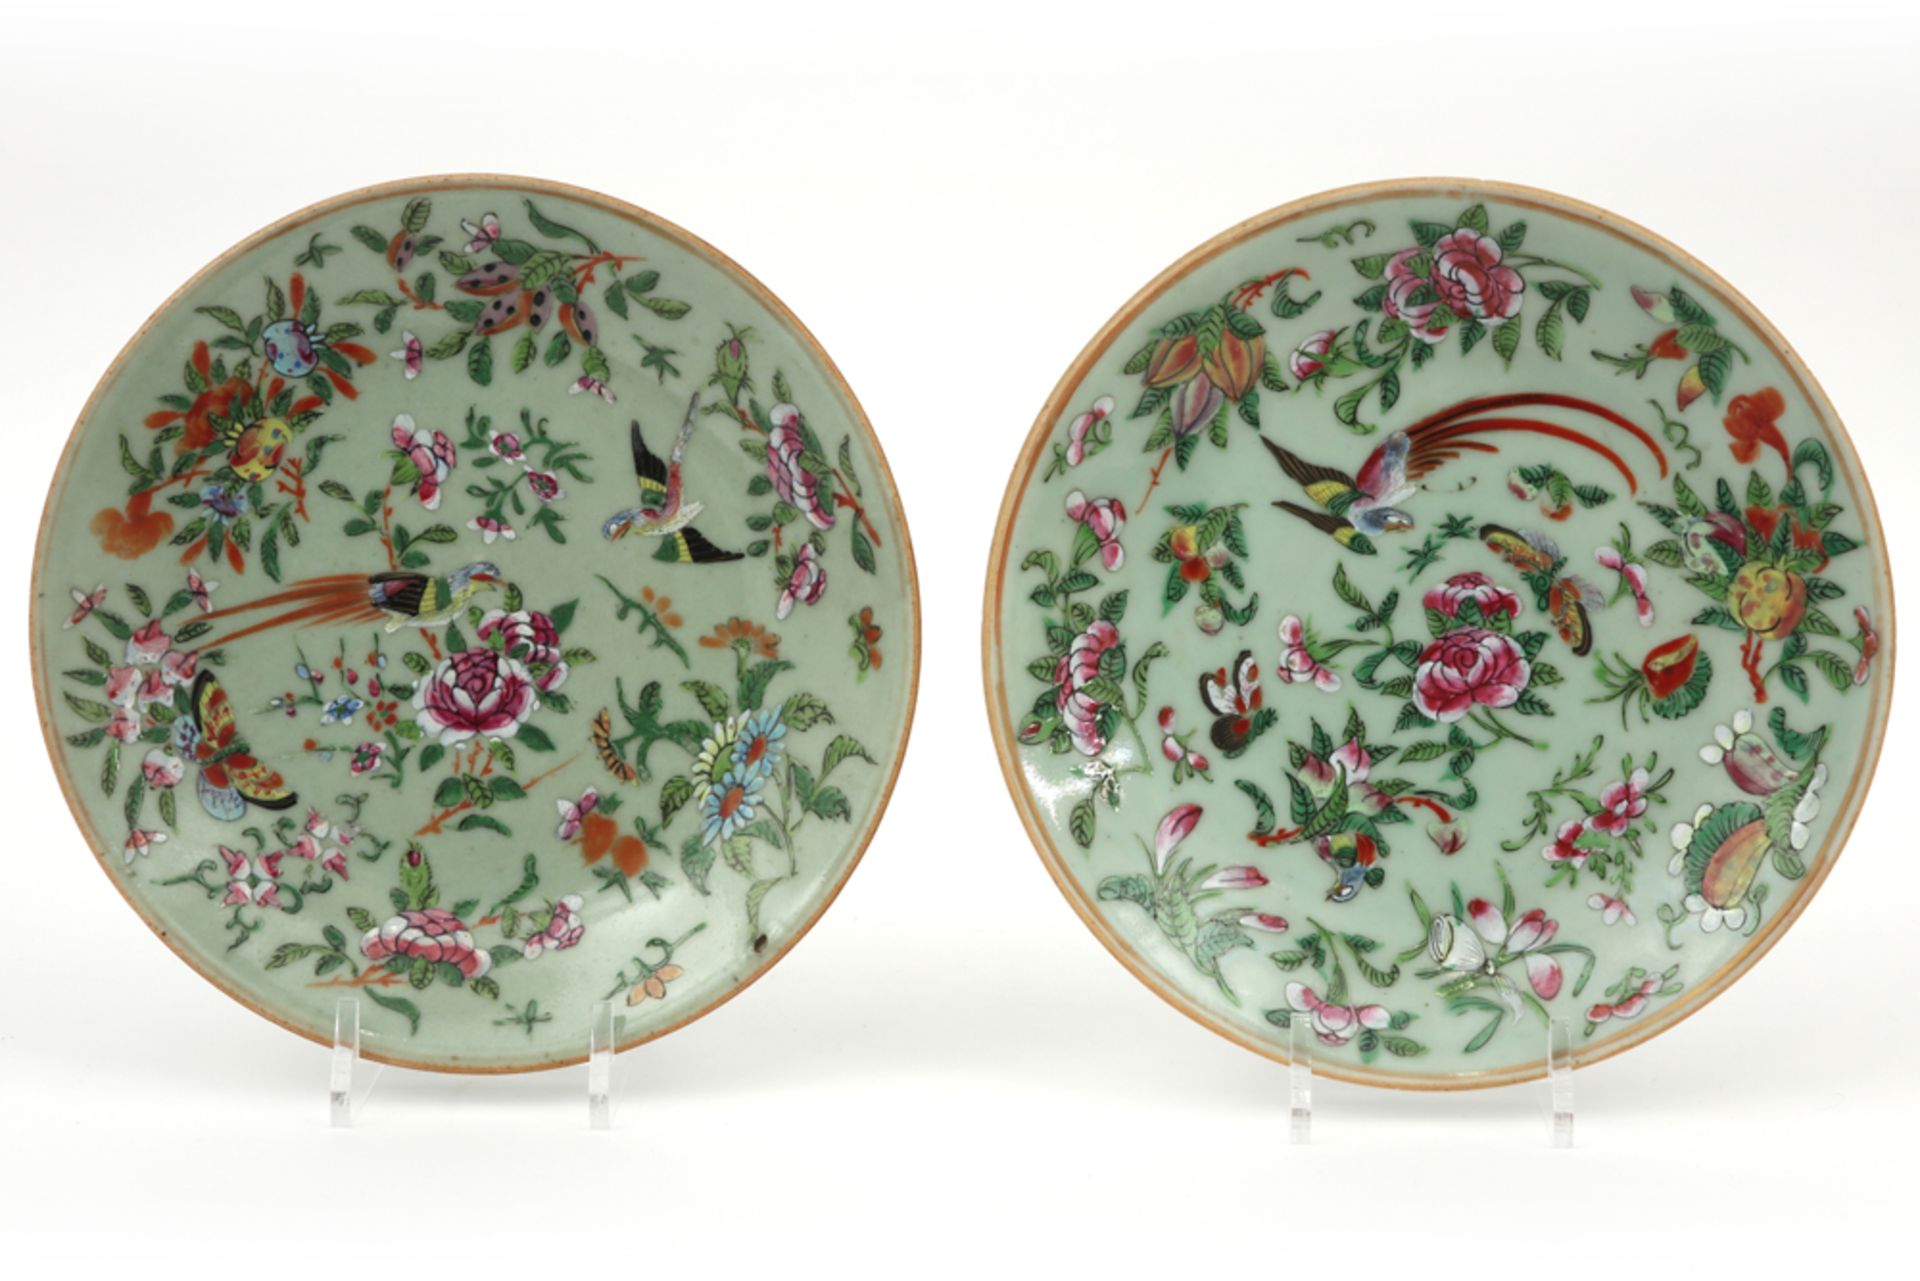 pair of 19th Cent. Chinese plates in celadon porcelain with a 'Famille Rose' decor || Paar